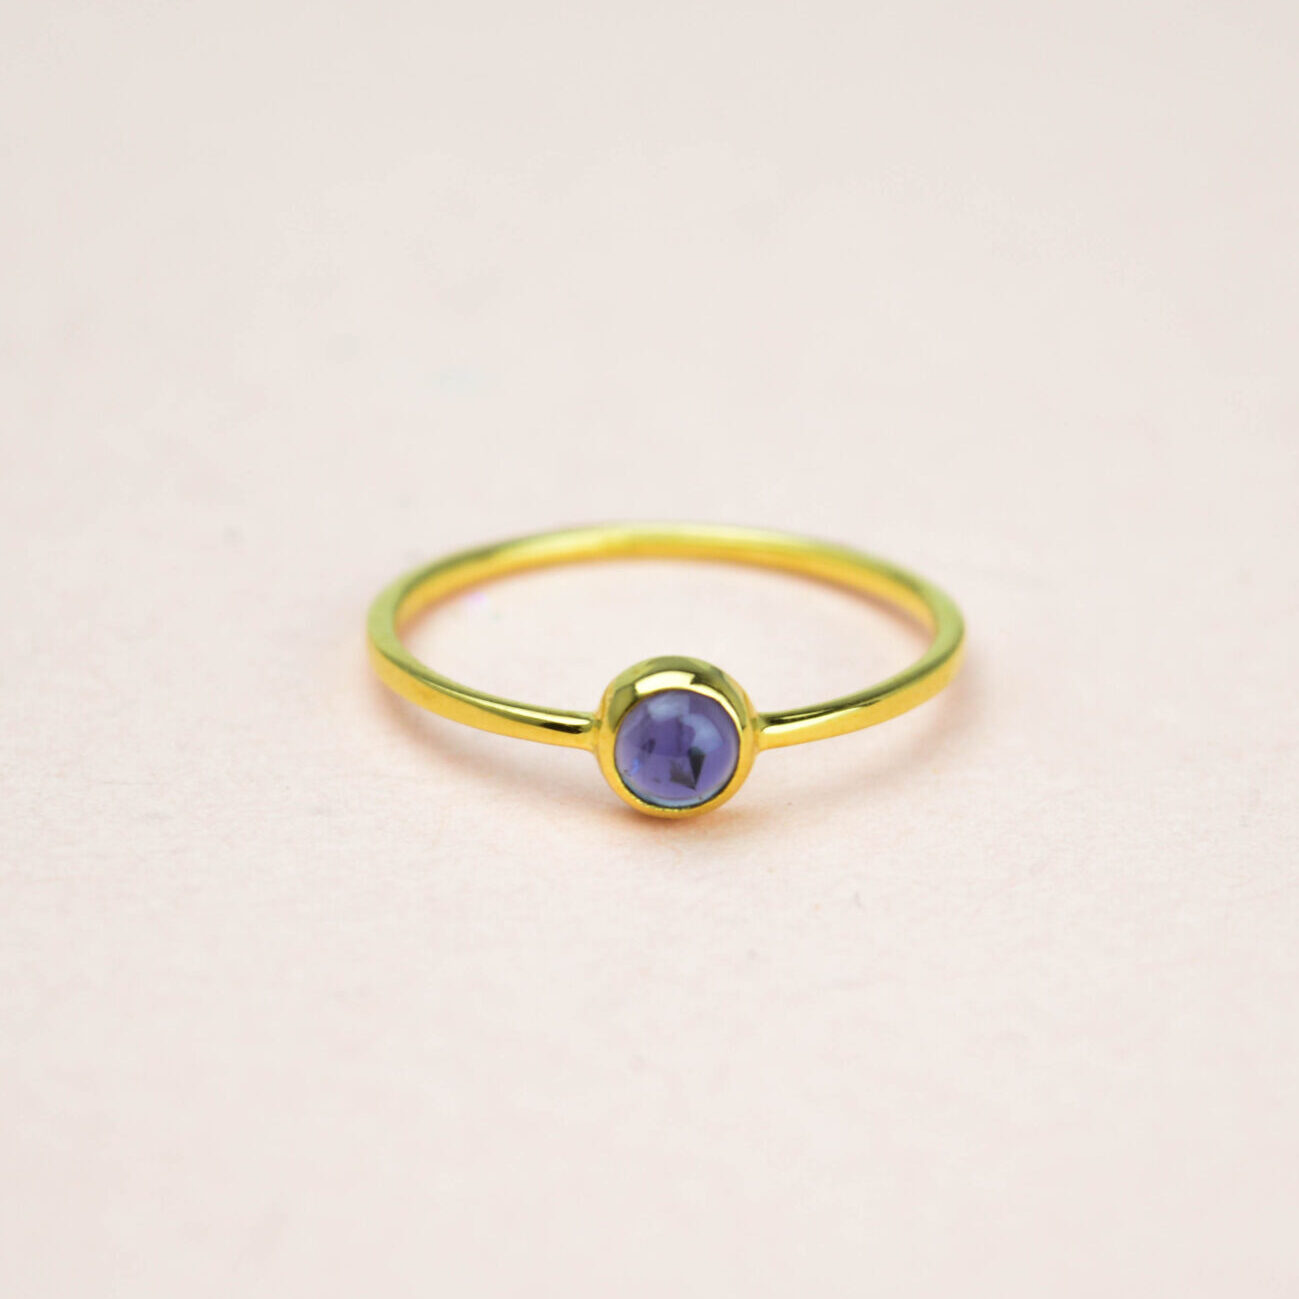 Natural Iolite Ring Dainty Minimalist Tiny Thin 925 Sterling Silver Delicate 